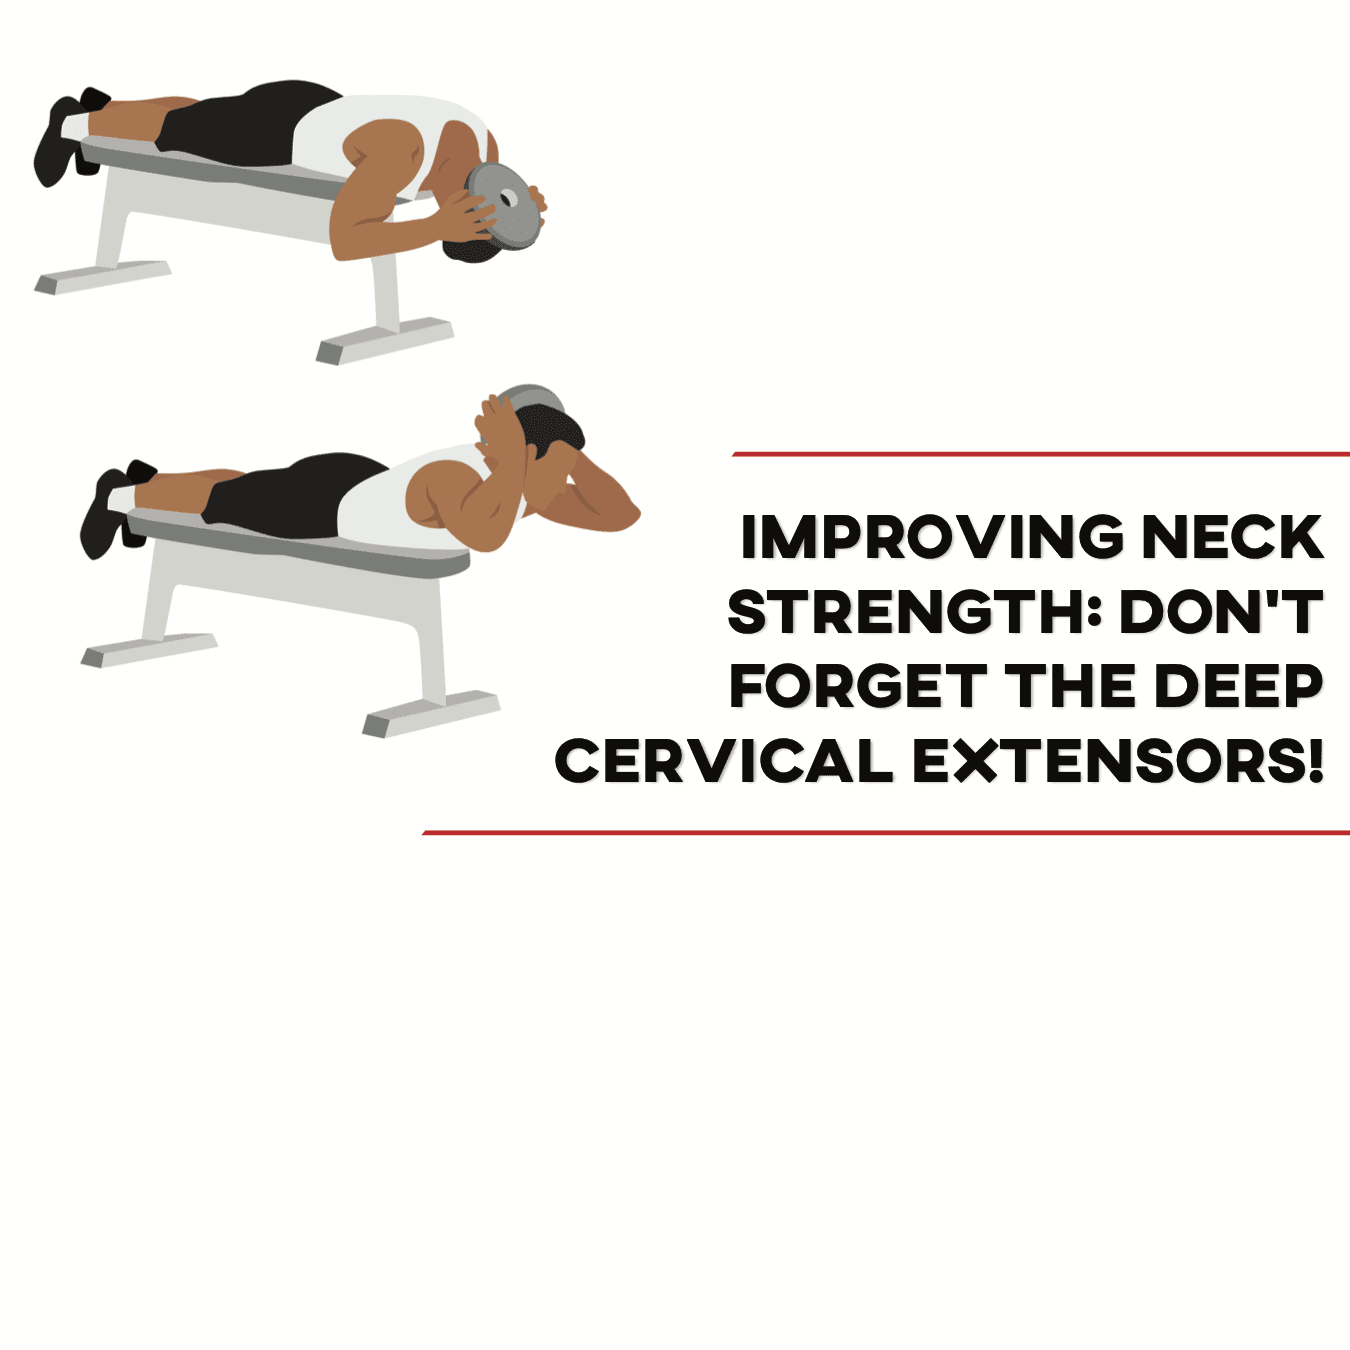 Improving Neck Strength: Don't Forget The Deep Cervical Extensors